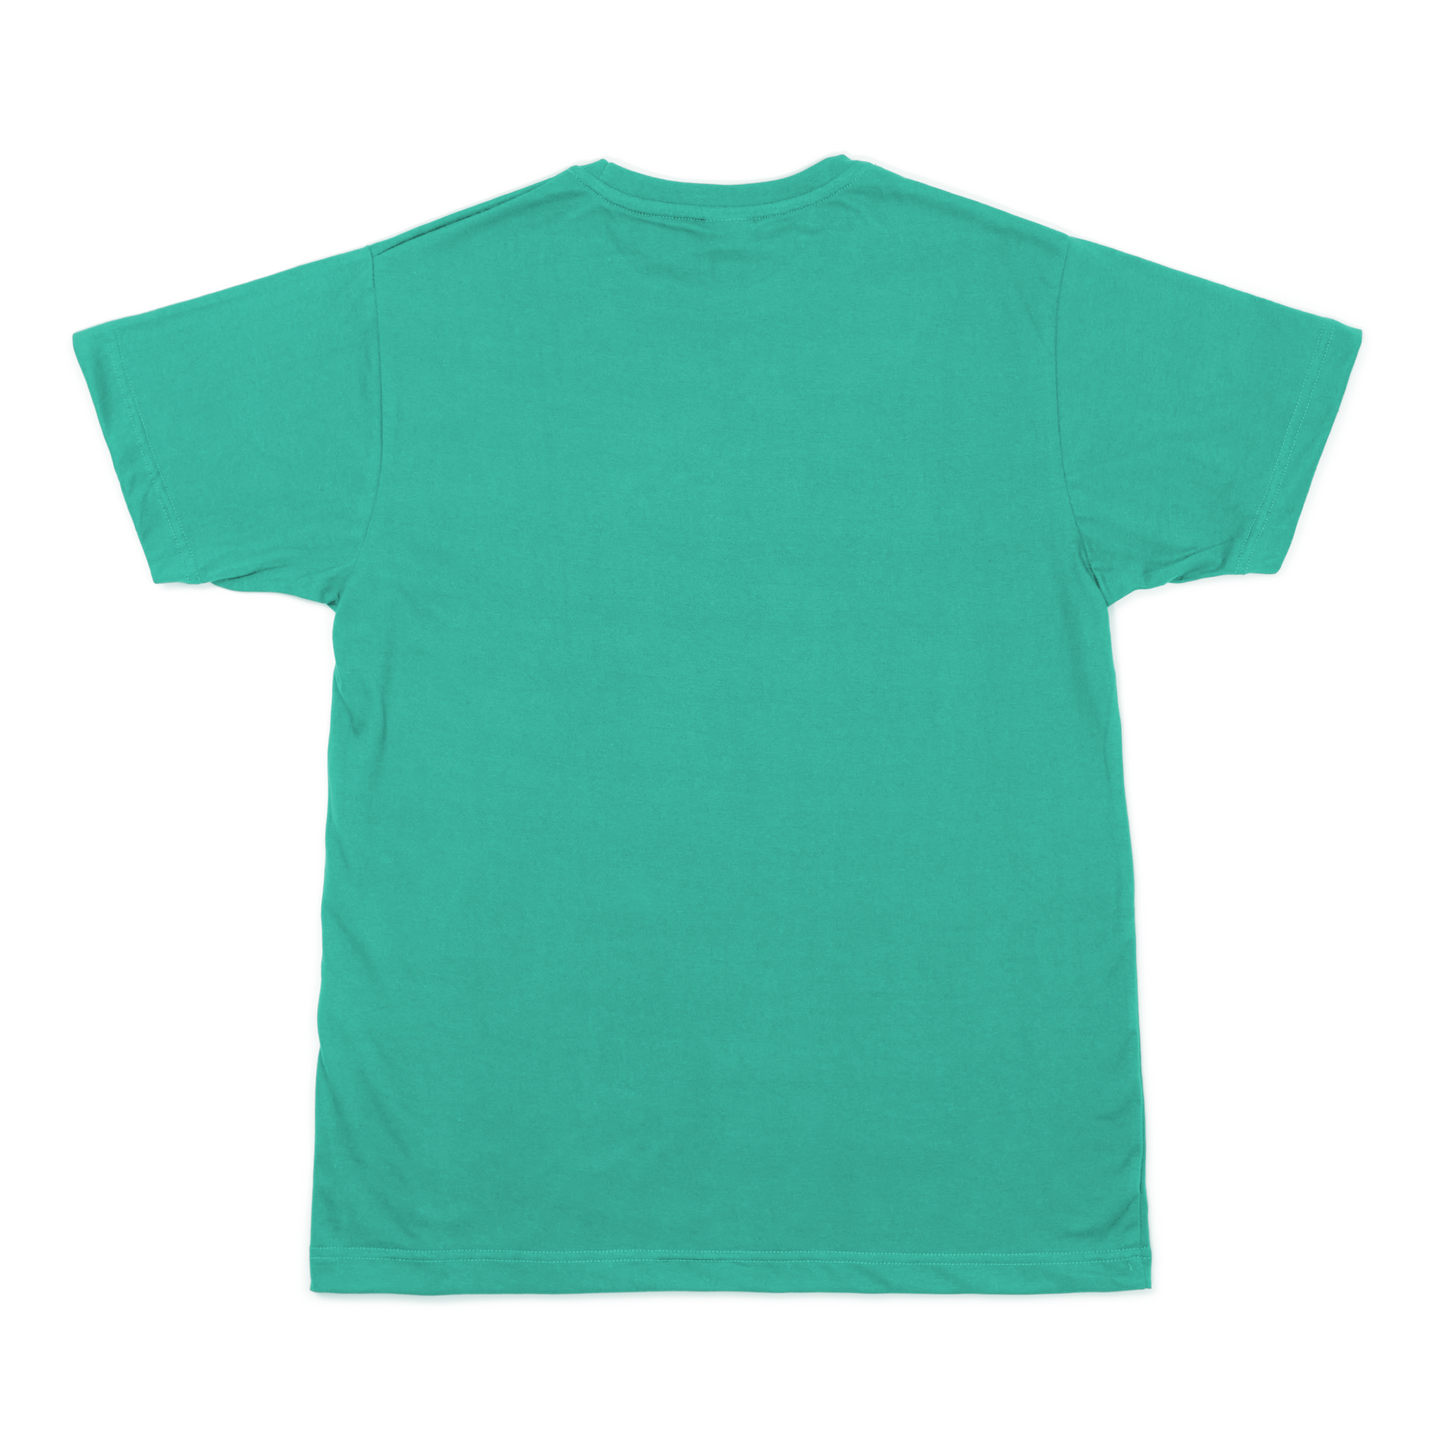 Relaxed Fit Hemp Tee - Teal